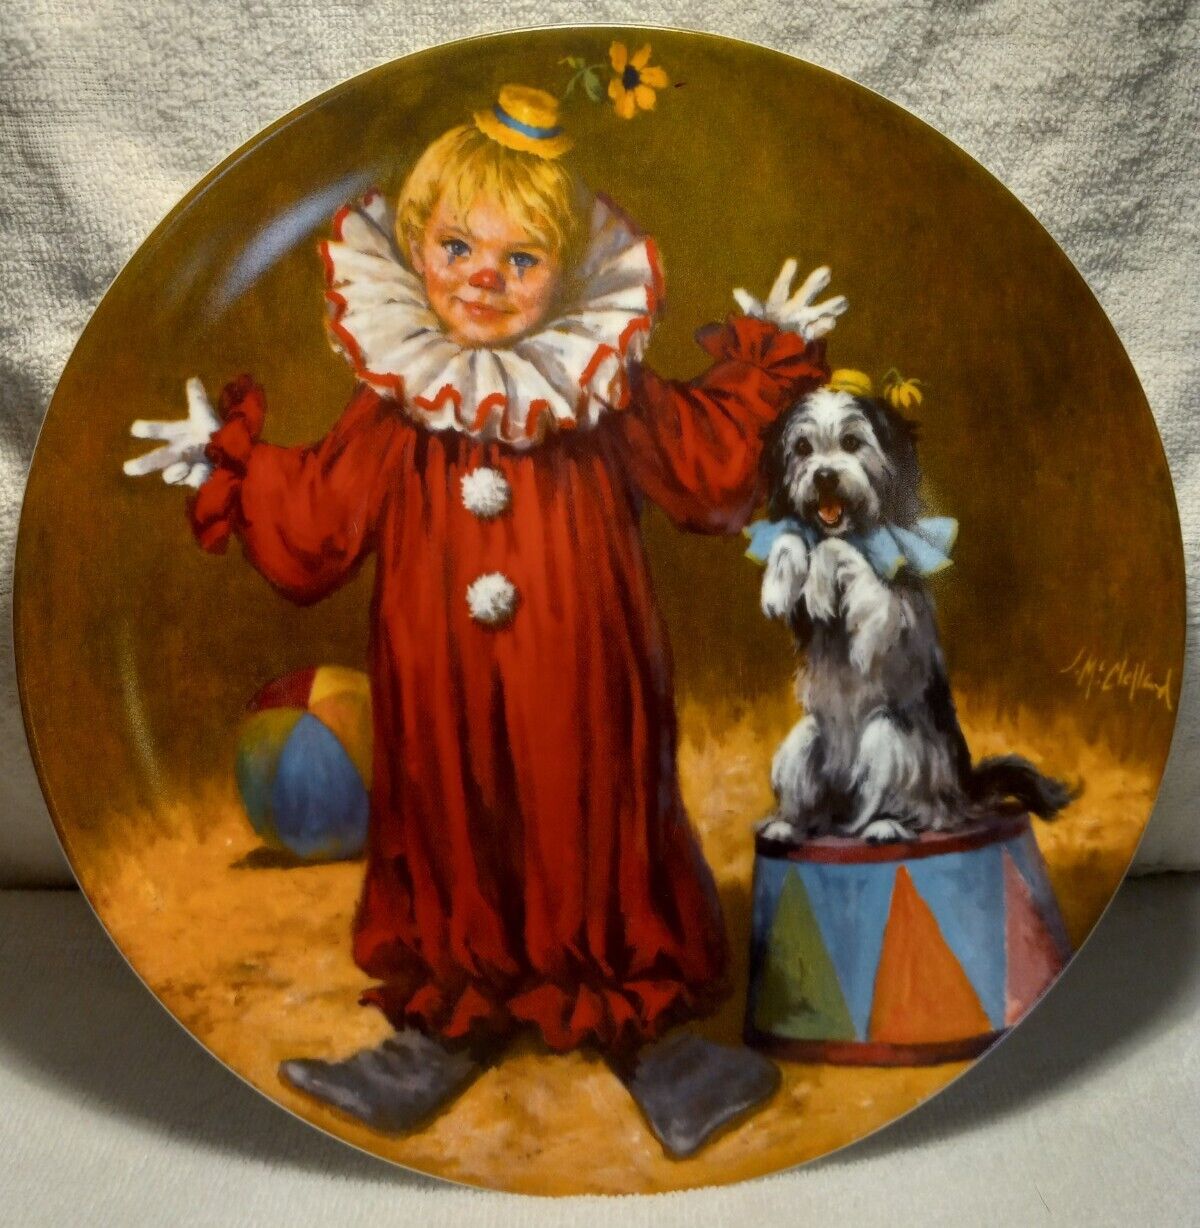 VTG 1982 RECO ~Tommy the Clown~ Collectible Plate from Edwin M. Knowles China - 